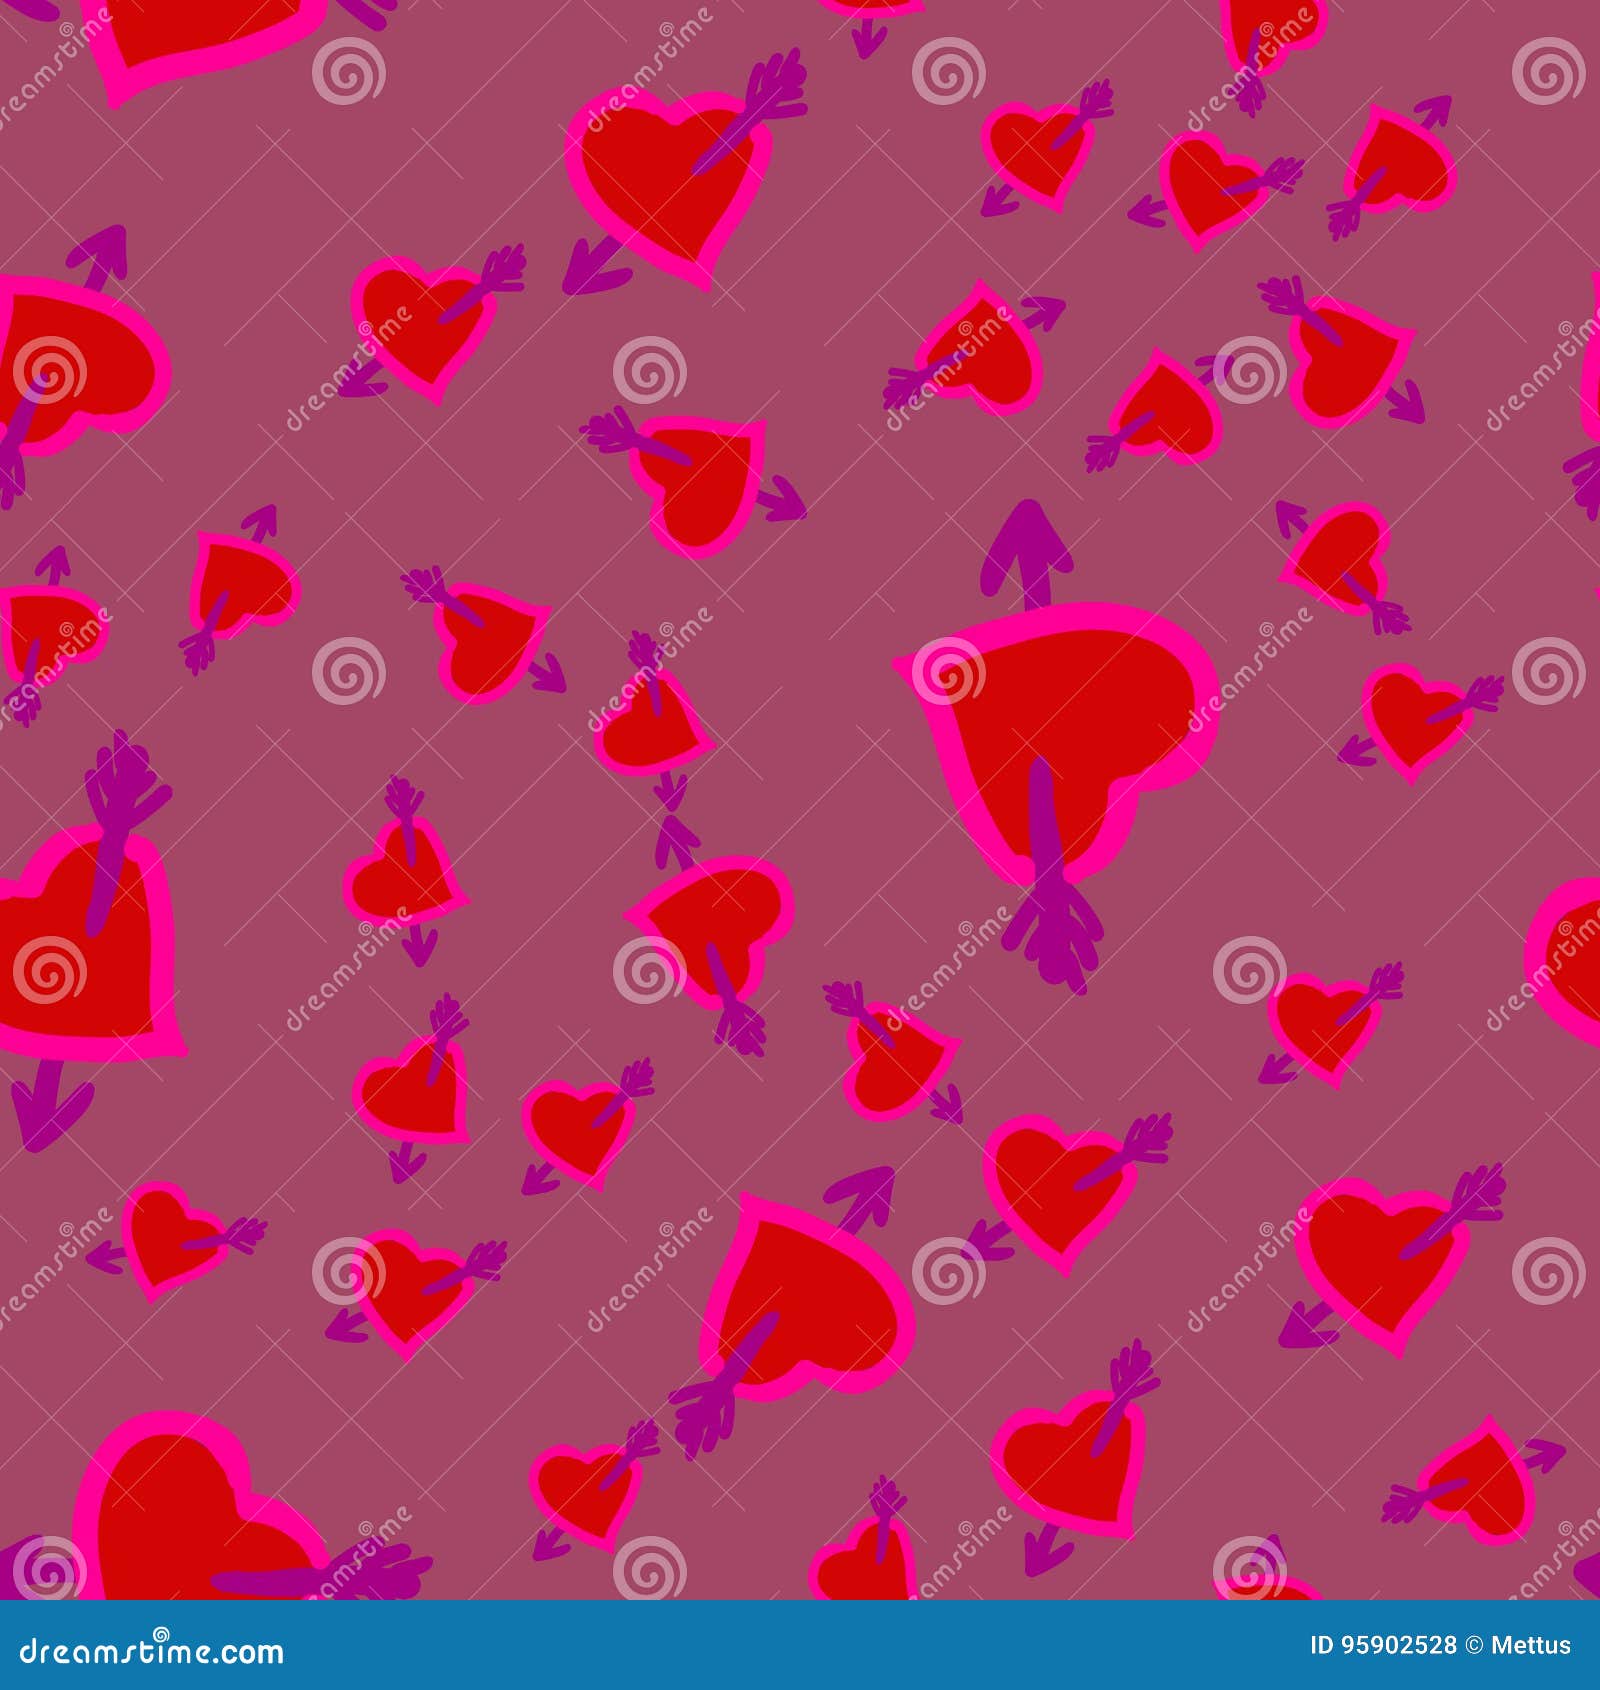 Cupid`s Arrows in Hearts Seamless Pattern on Violet Background ...